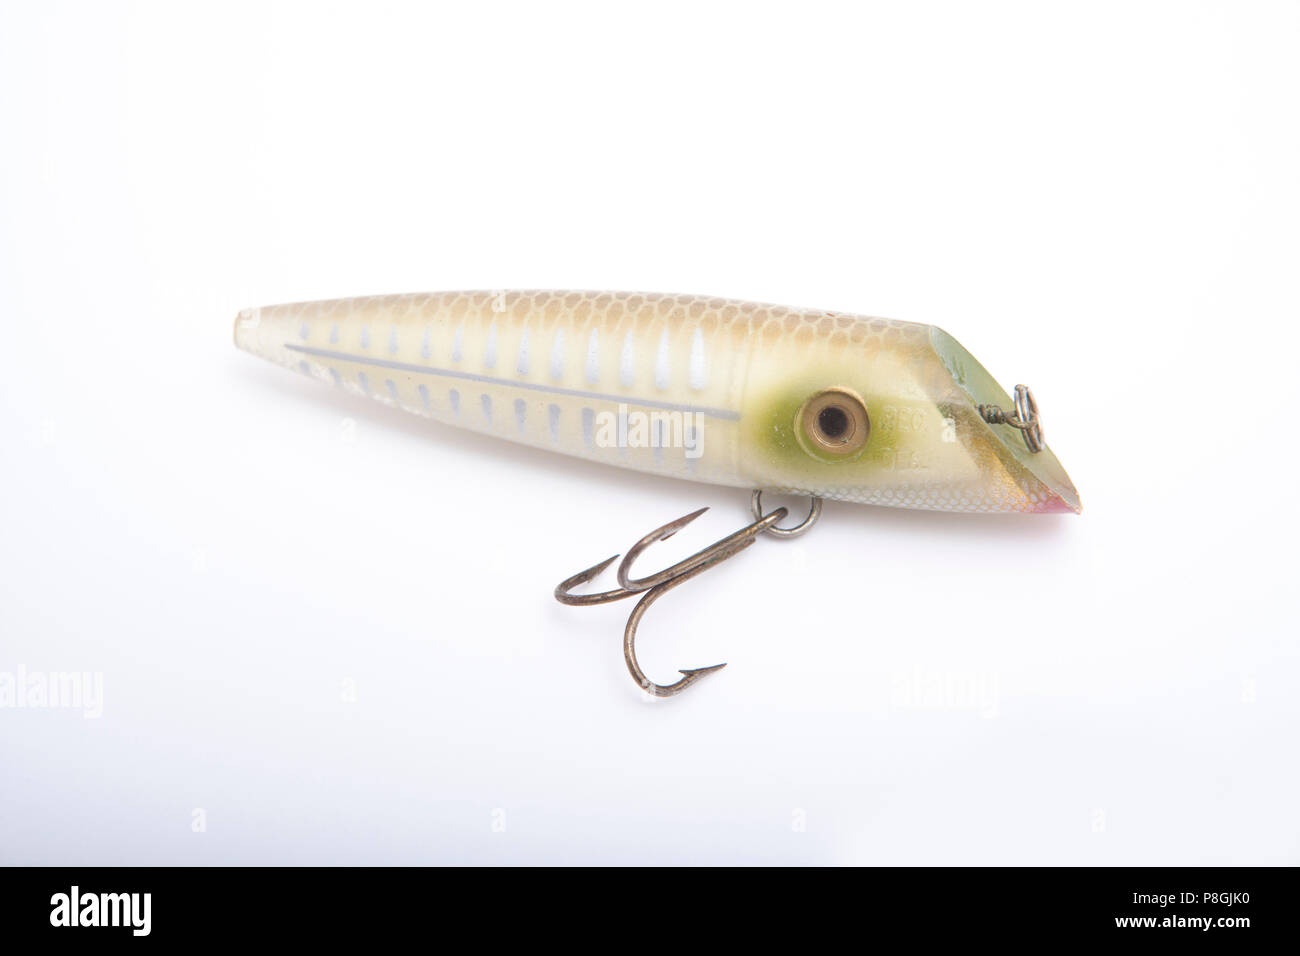 An old Abu Kynoch Killer lure that was used for predatory fish and